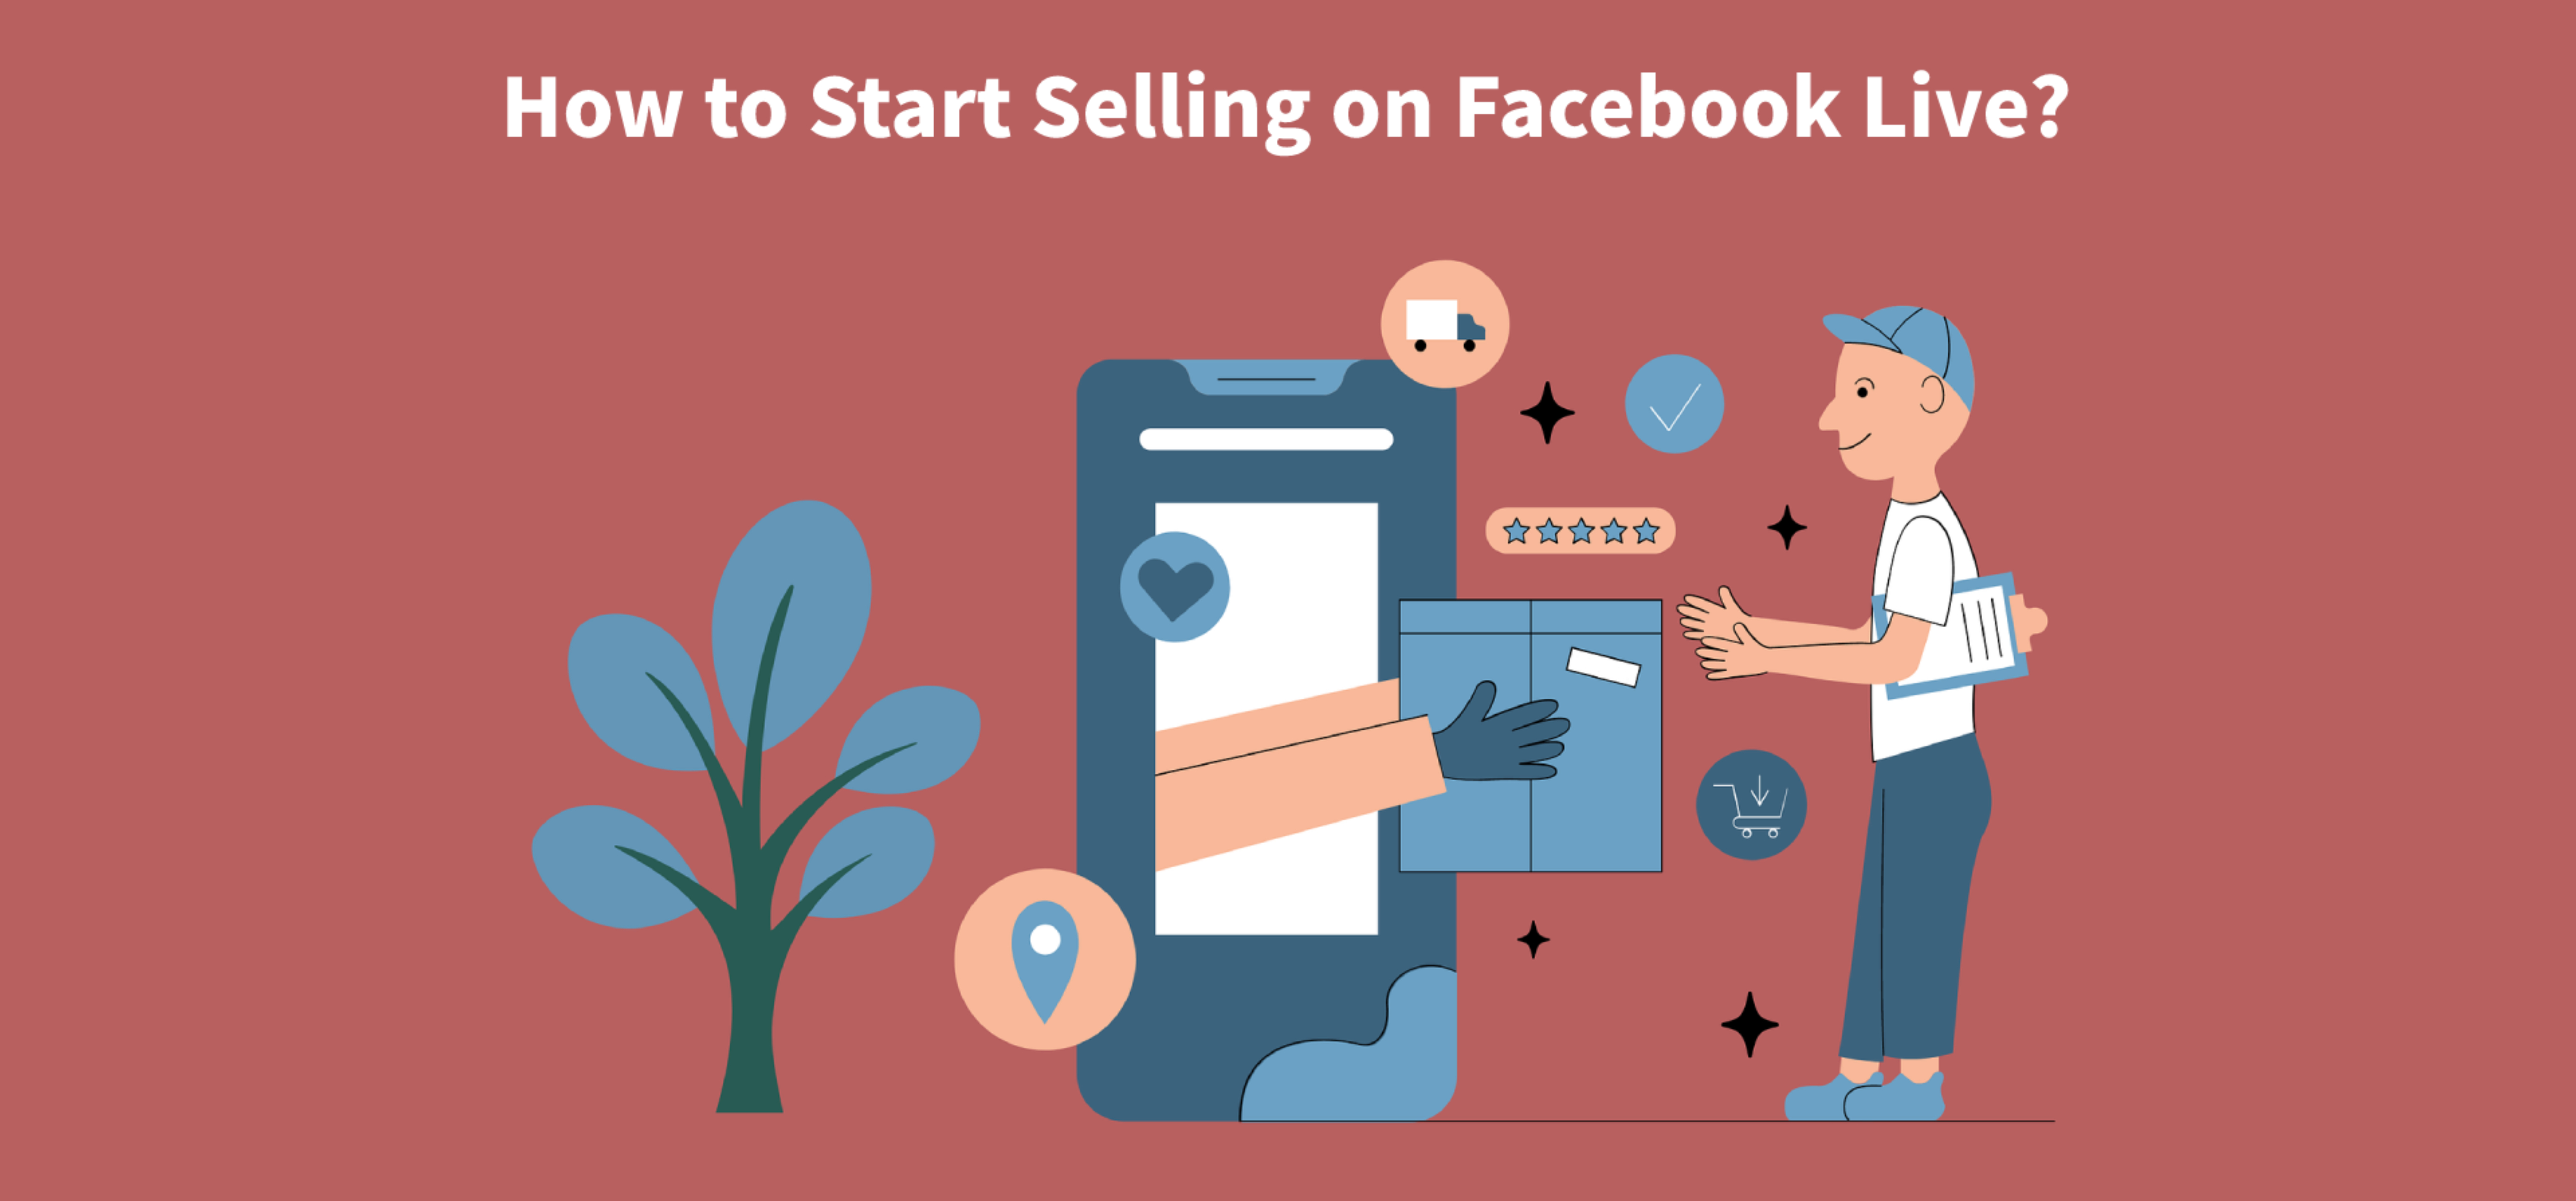 How to Start Selling on Facebook Live?